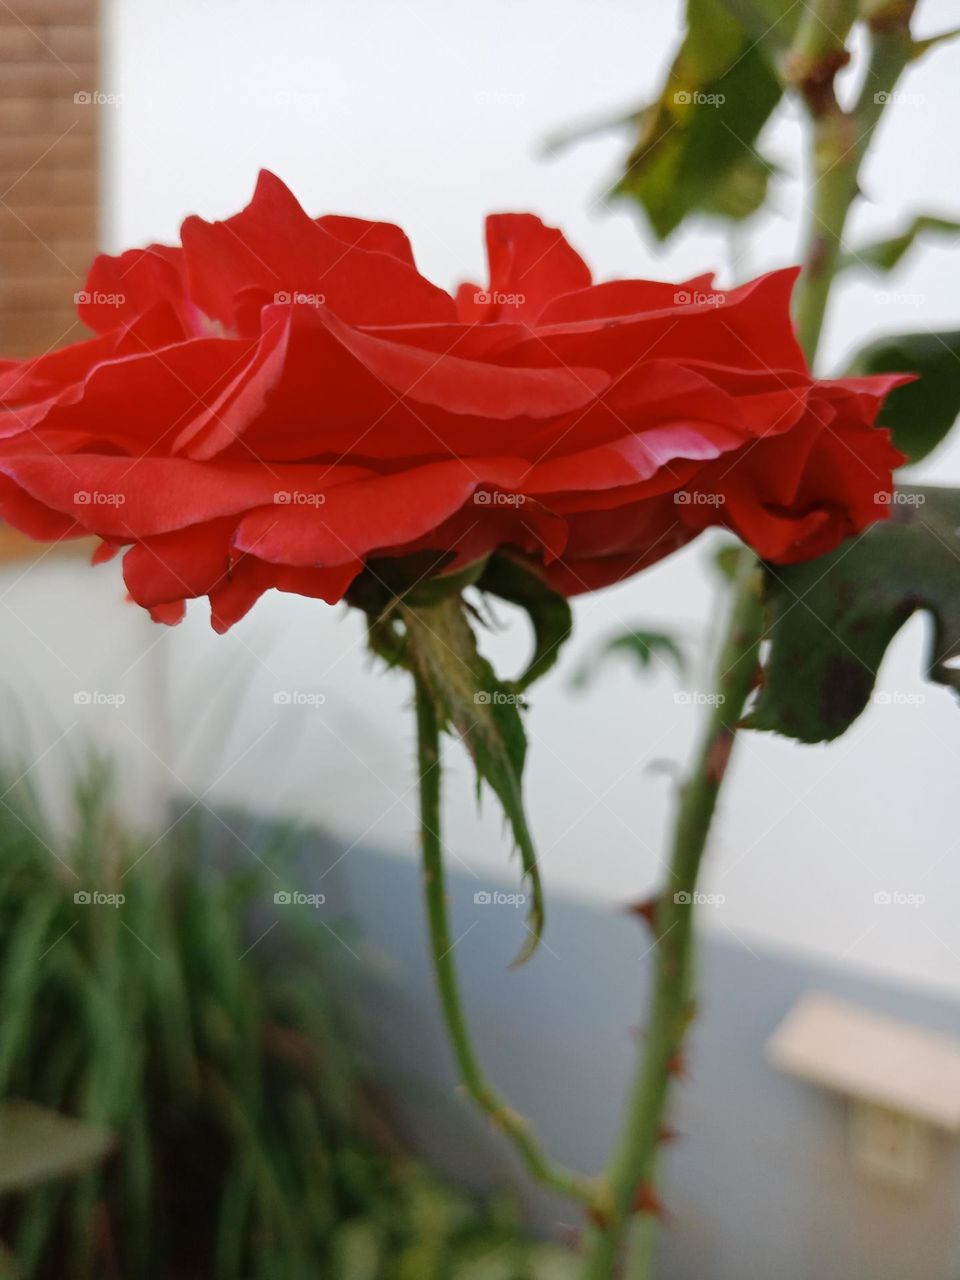 A red rose and its beautiful petals from a side perpective